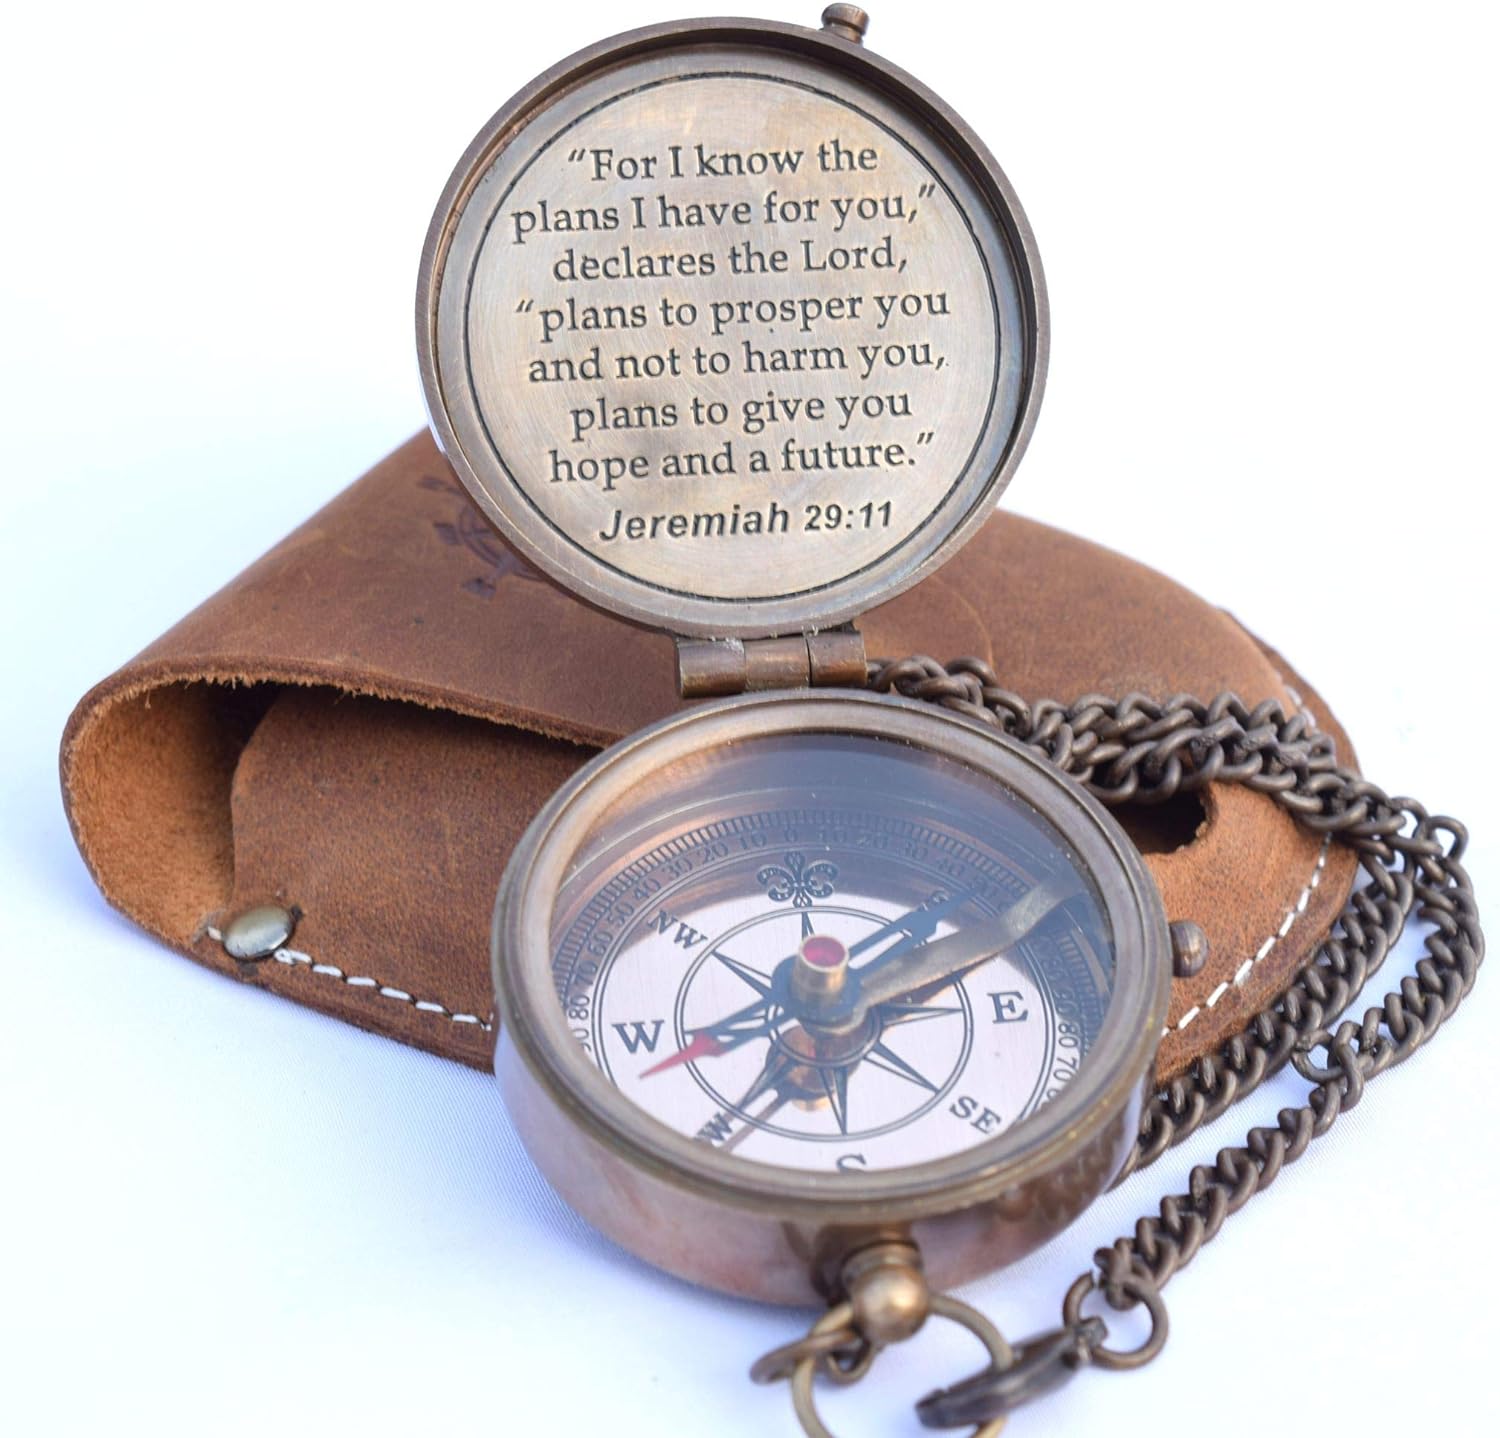 NEOVIVID Religious Gifts For Men, lds Missionary gifts, Easter Gifts For Teen Boys, Compass Gifts For Men, Catholic Gifts Men, Christian, Jeremiah 29 11, Personalized, Sentimental, Inspirational Gifts